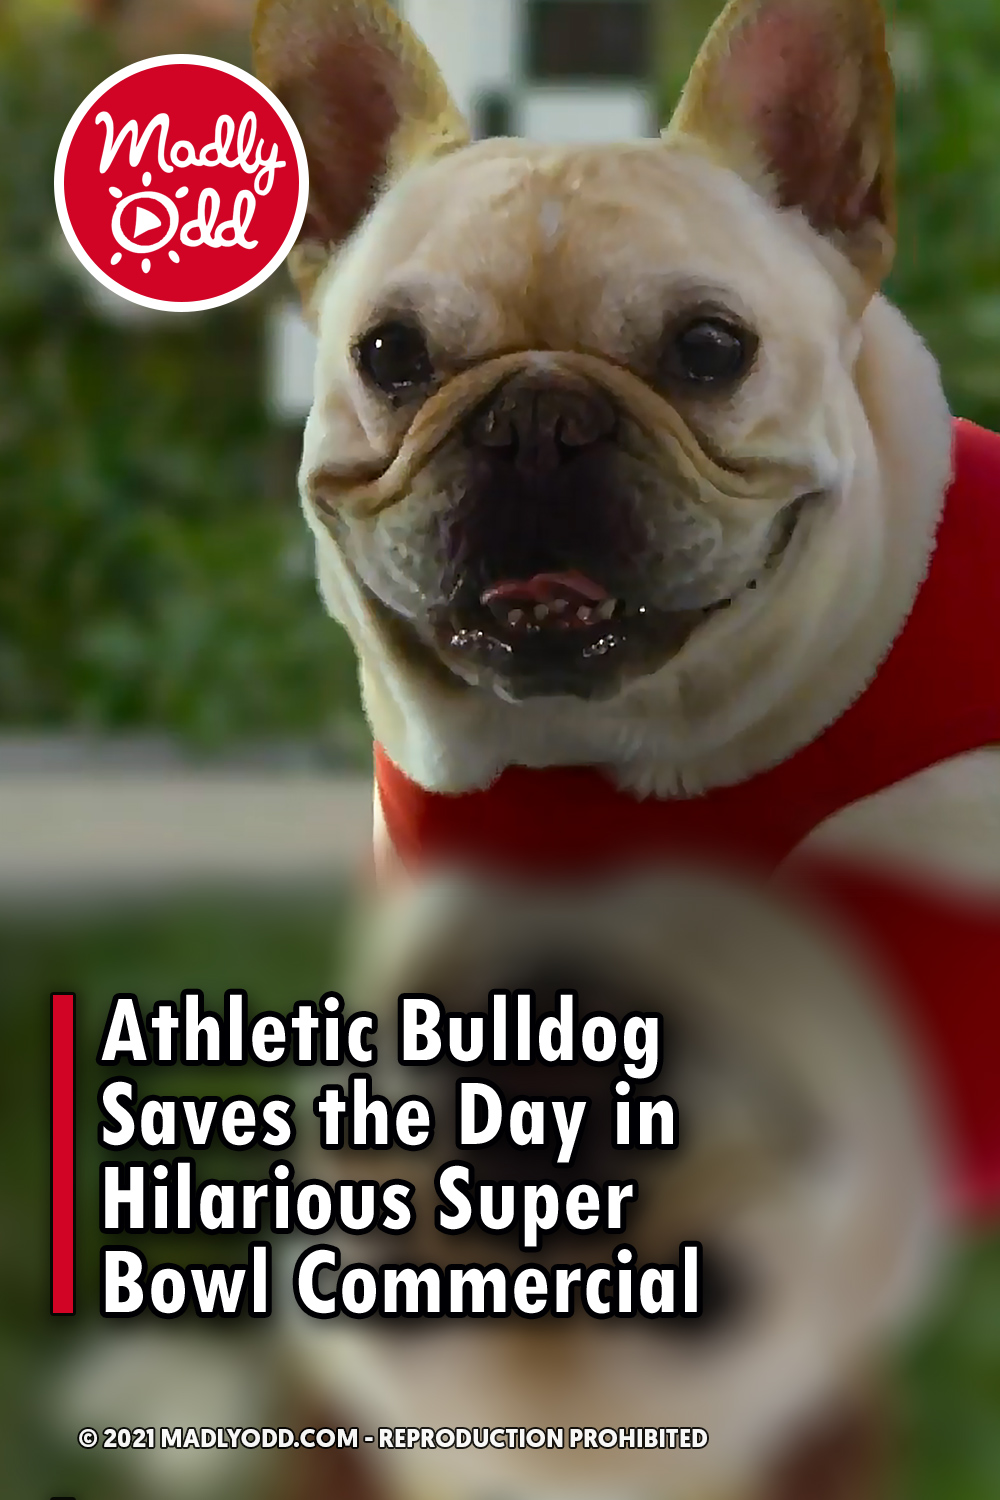 Athletic Bulldog Saves the Day in Hilarious Super Bowl Commercial